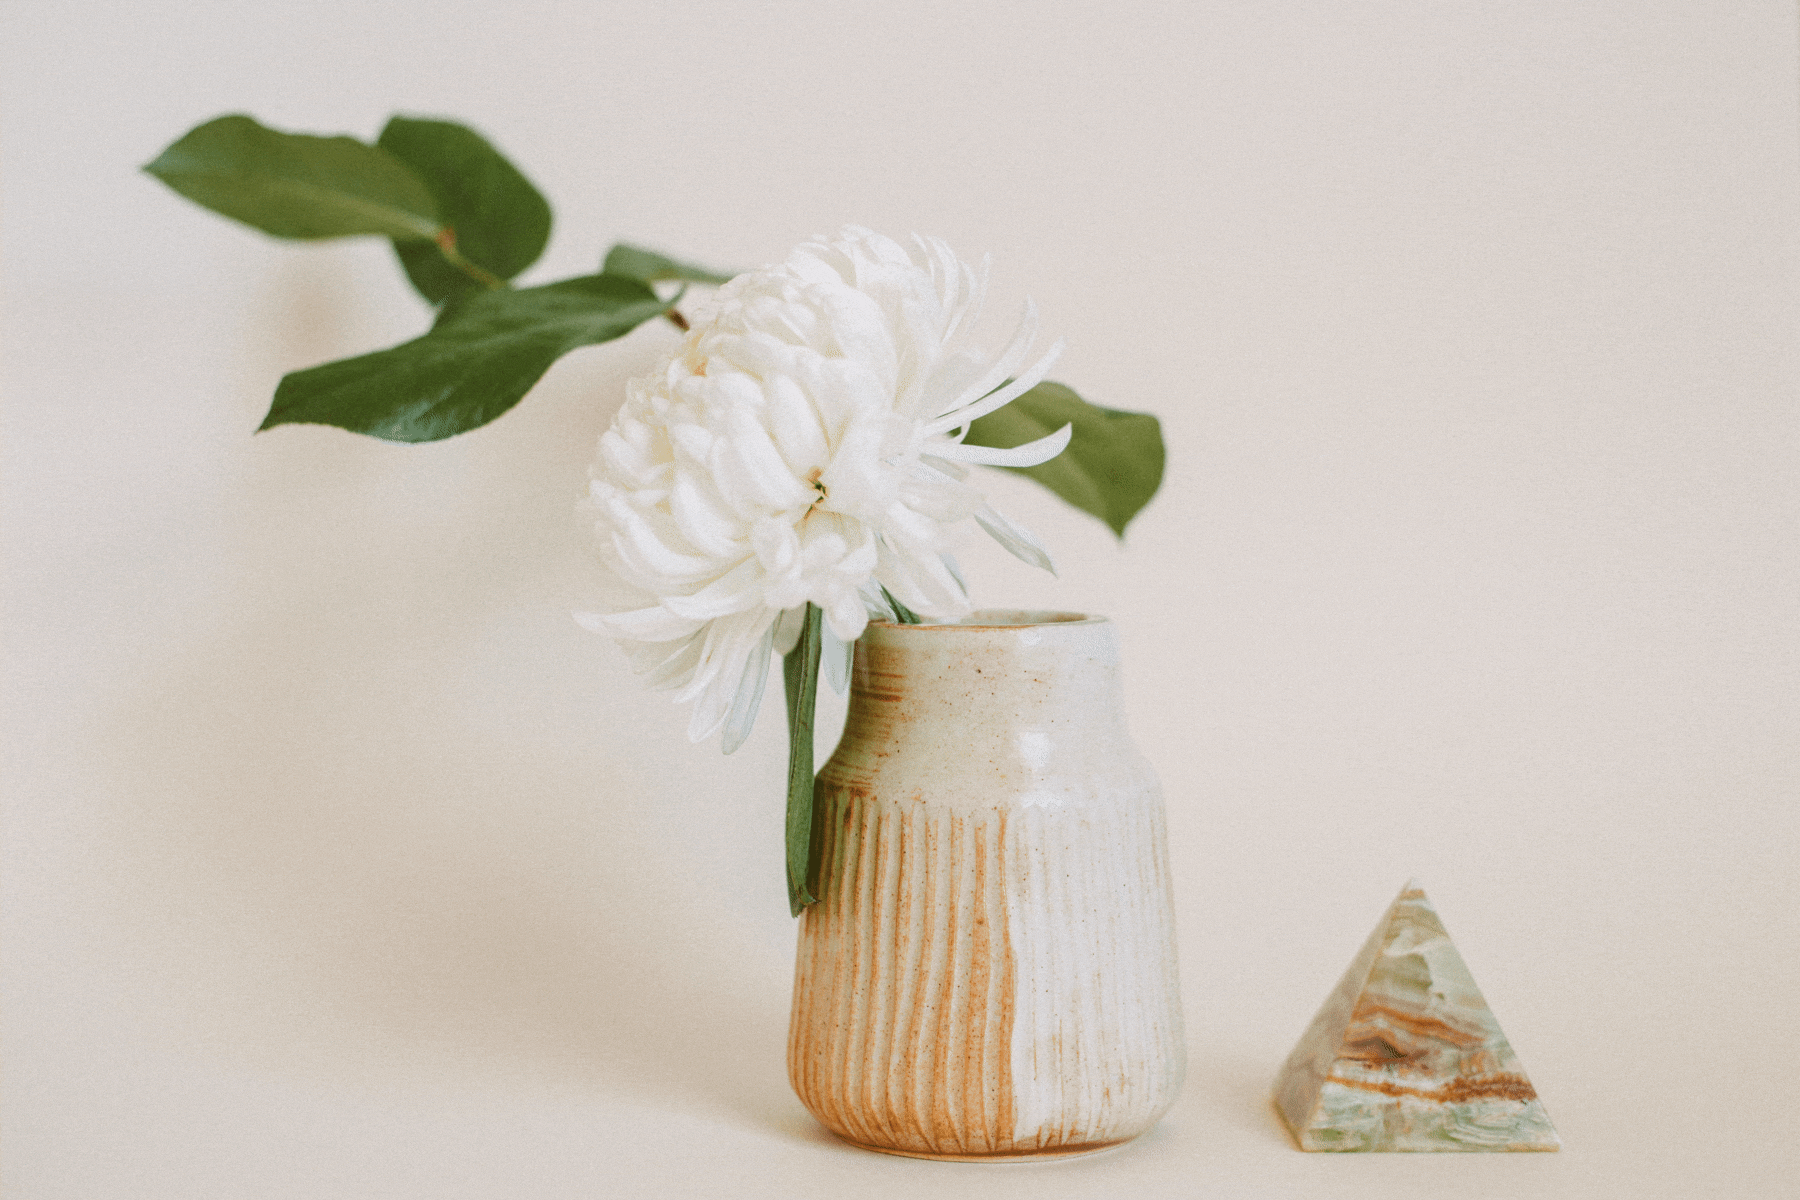 How Pottery Inspired Our Latest Website Template Design